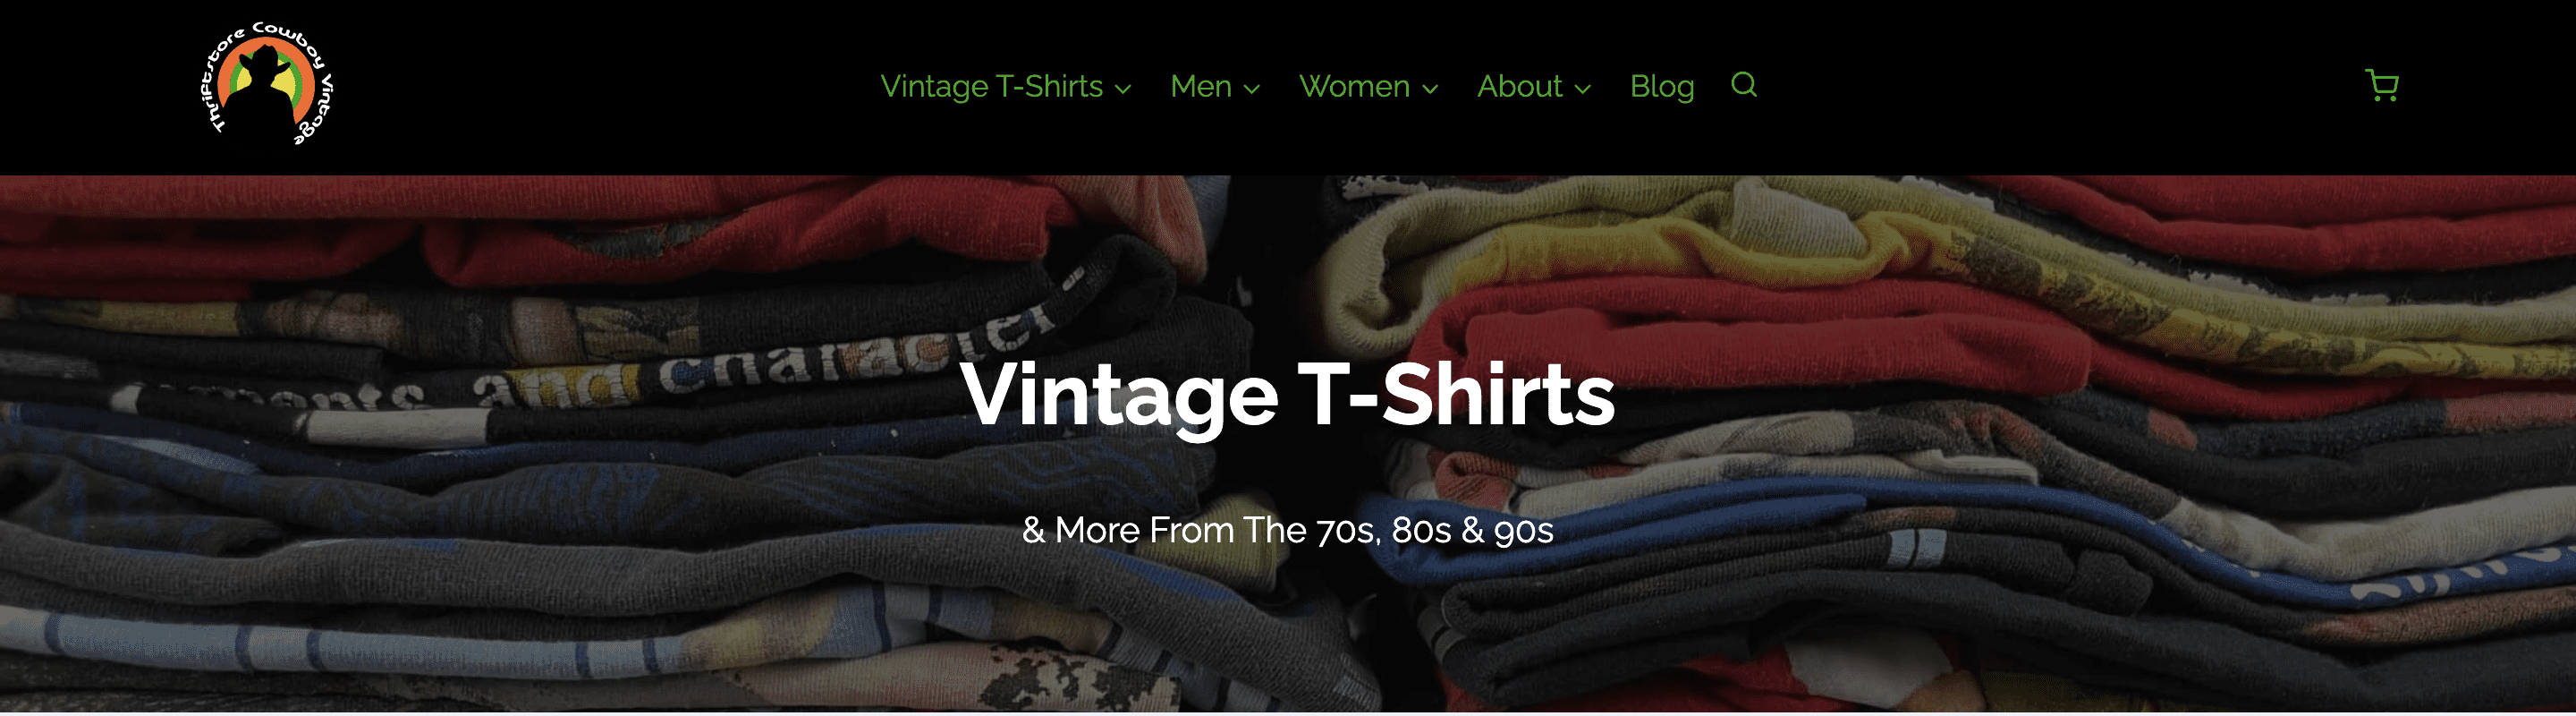 Vintage T-Shirts on Thriftstore Cowboy Vintage